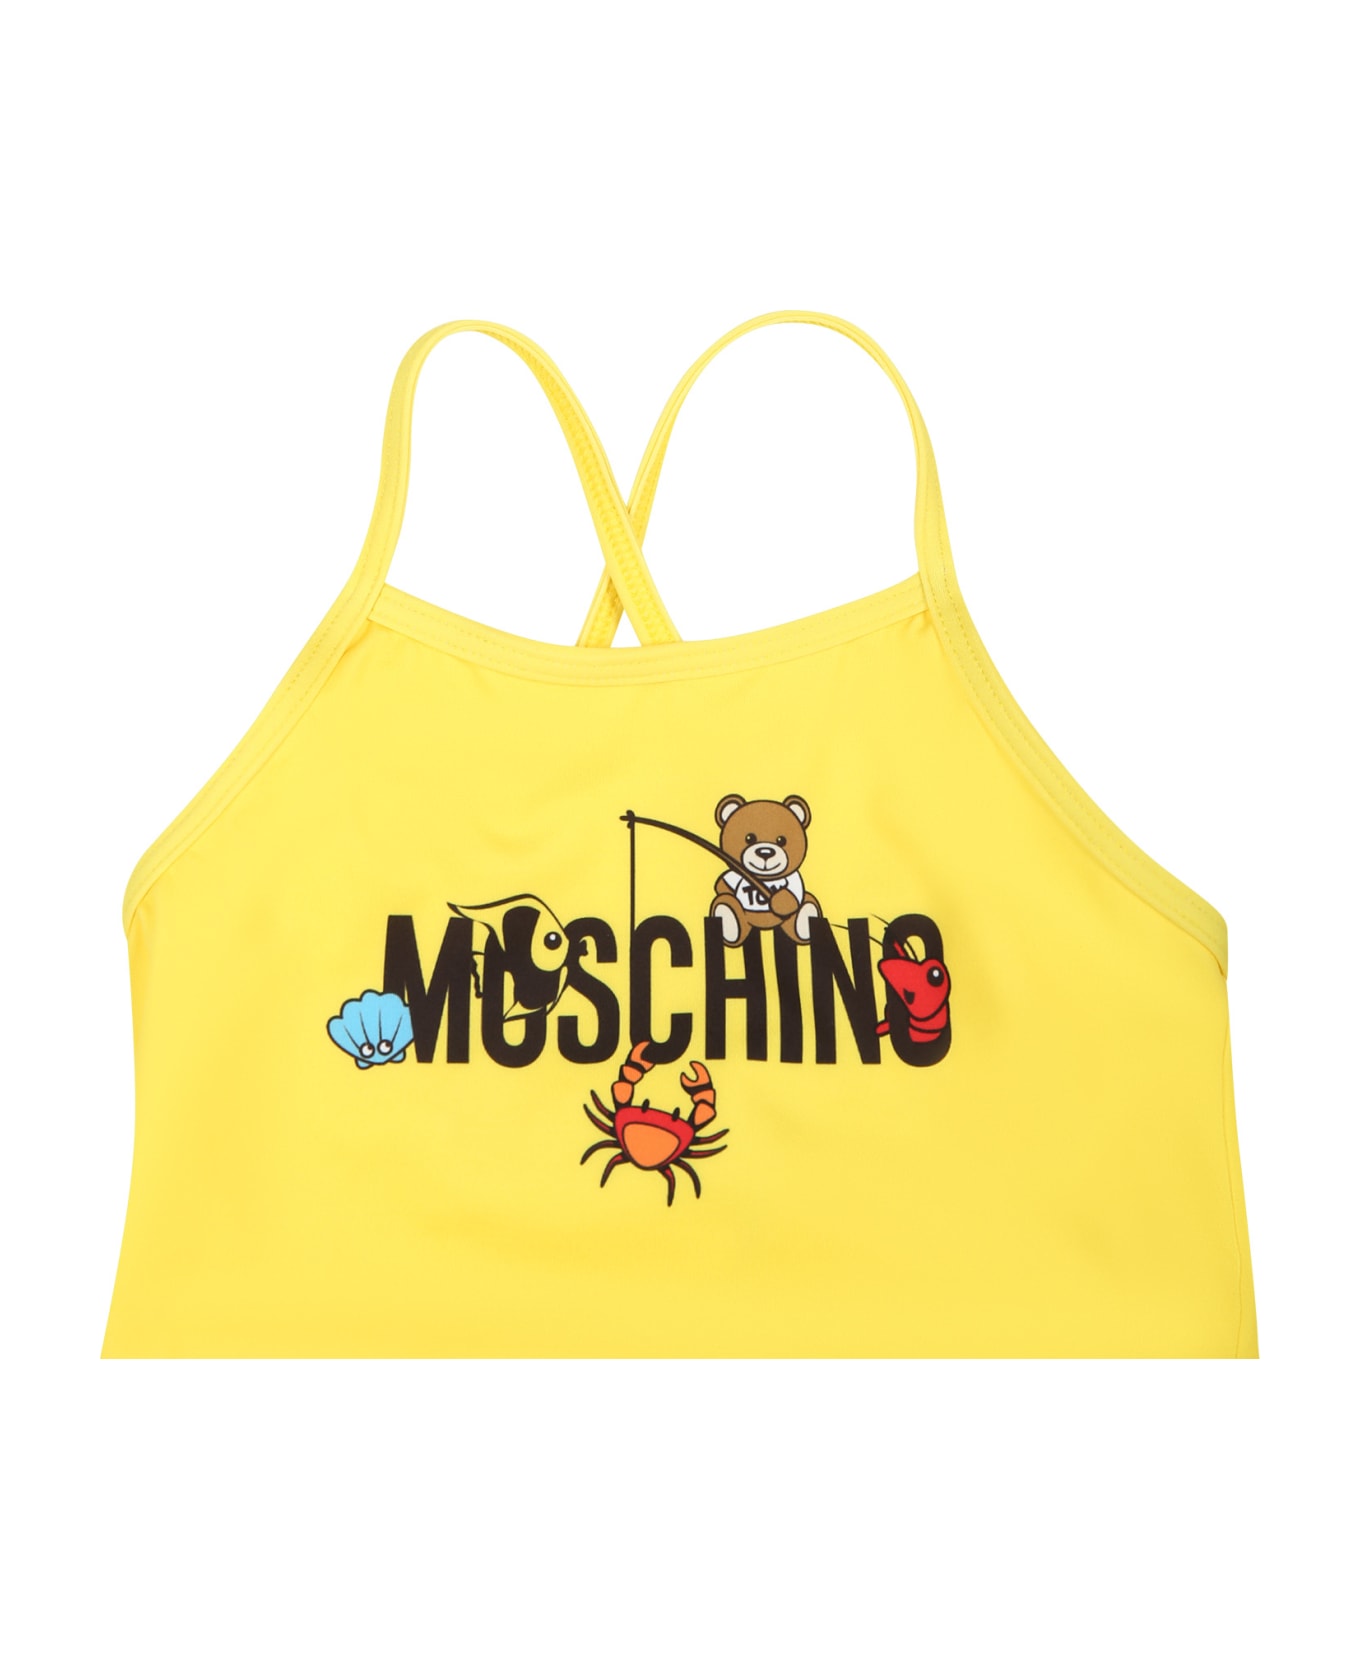 Moschino Yellow Swimsuit For Baby Girl With Teddy Bear And Marine Animals - Yellow